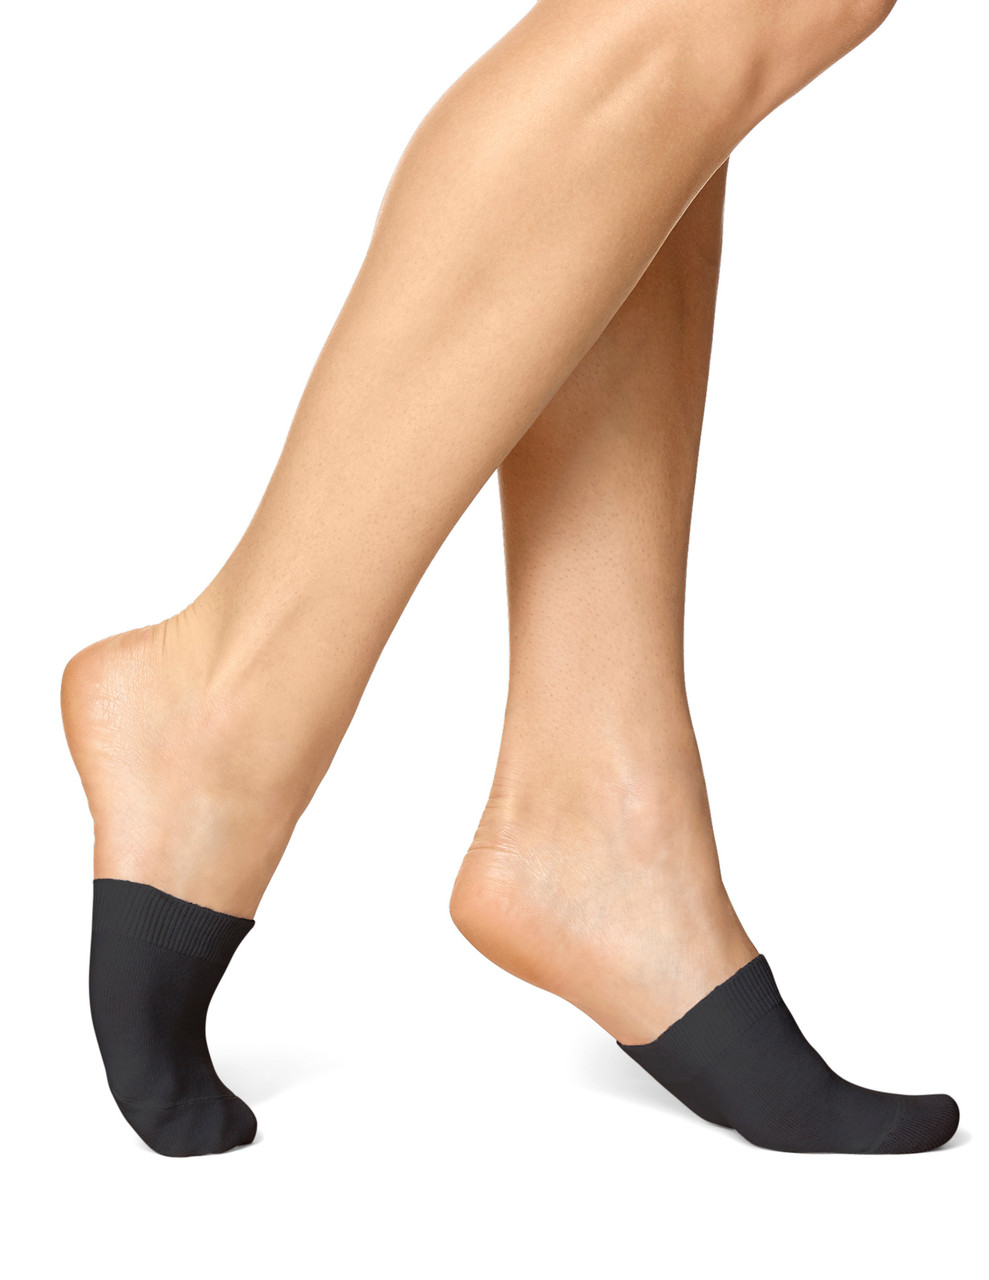  Toe Topper Socks No Show Liner Half Socks for Women Seamless  Grip Non Slip Socks Hidden Toe Covers Socks for Mule Invisible Footies 4  Pairs Black : Clothing, Shoes & Jewelry